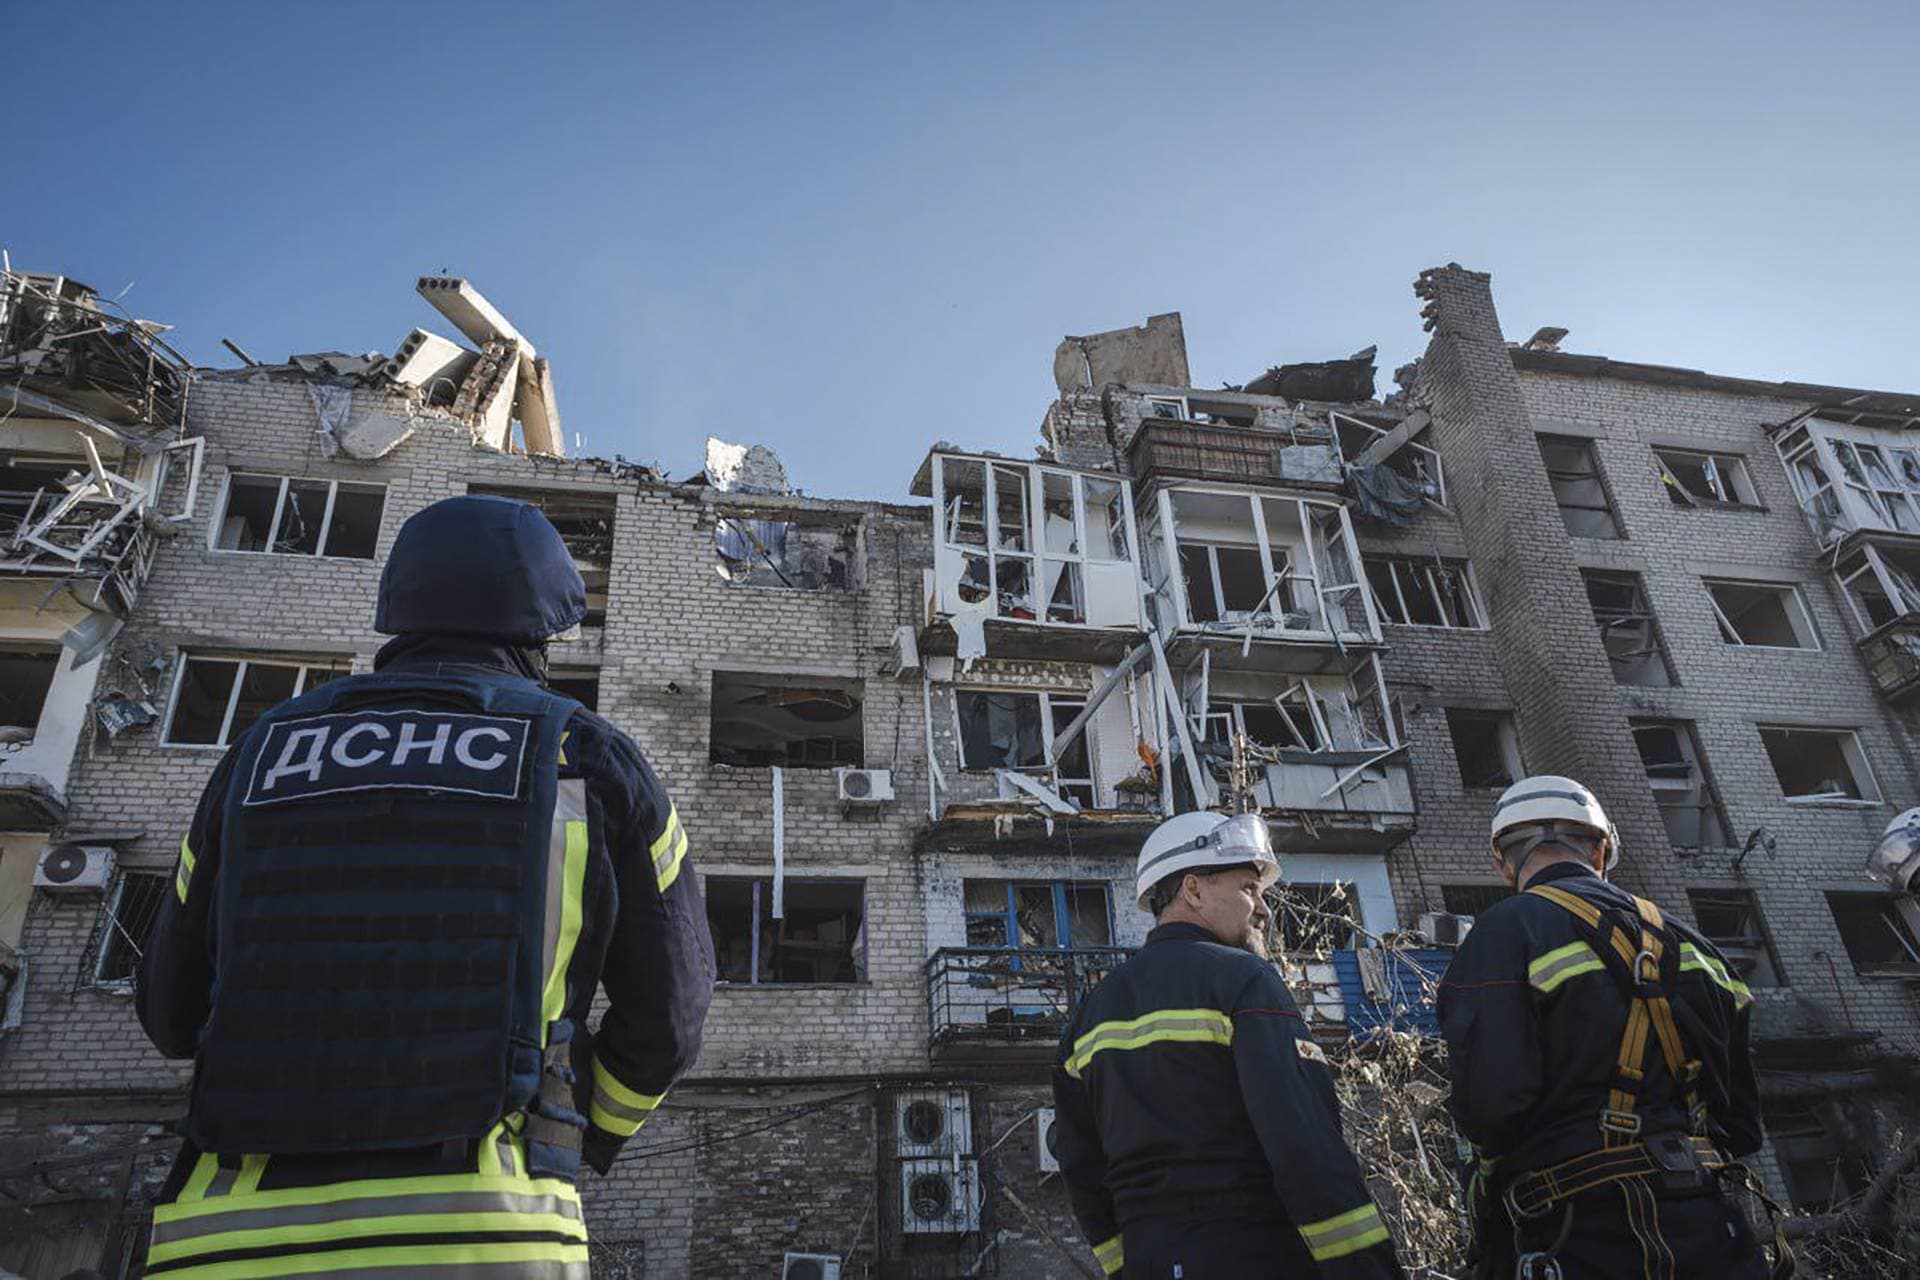 The Ukrainian Emergency Service rescuers work on the scene of a building damaged after Russian missile strikes in Pokrovsk